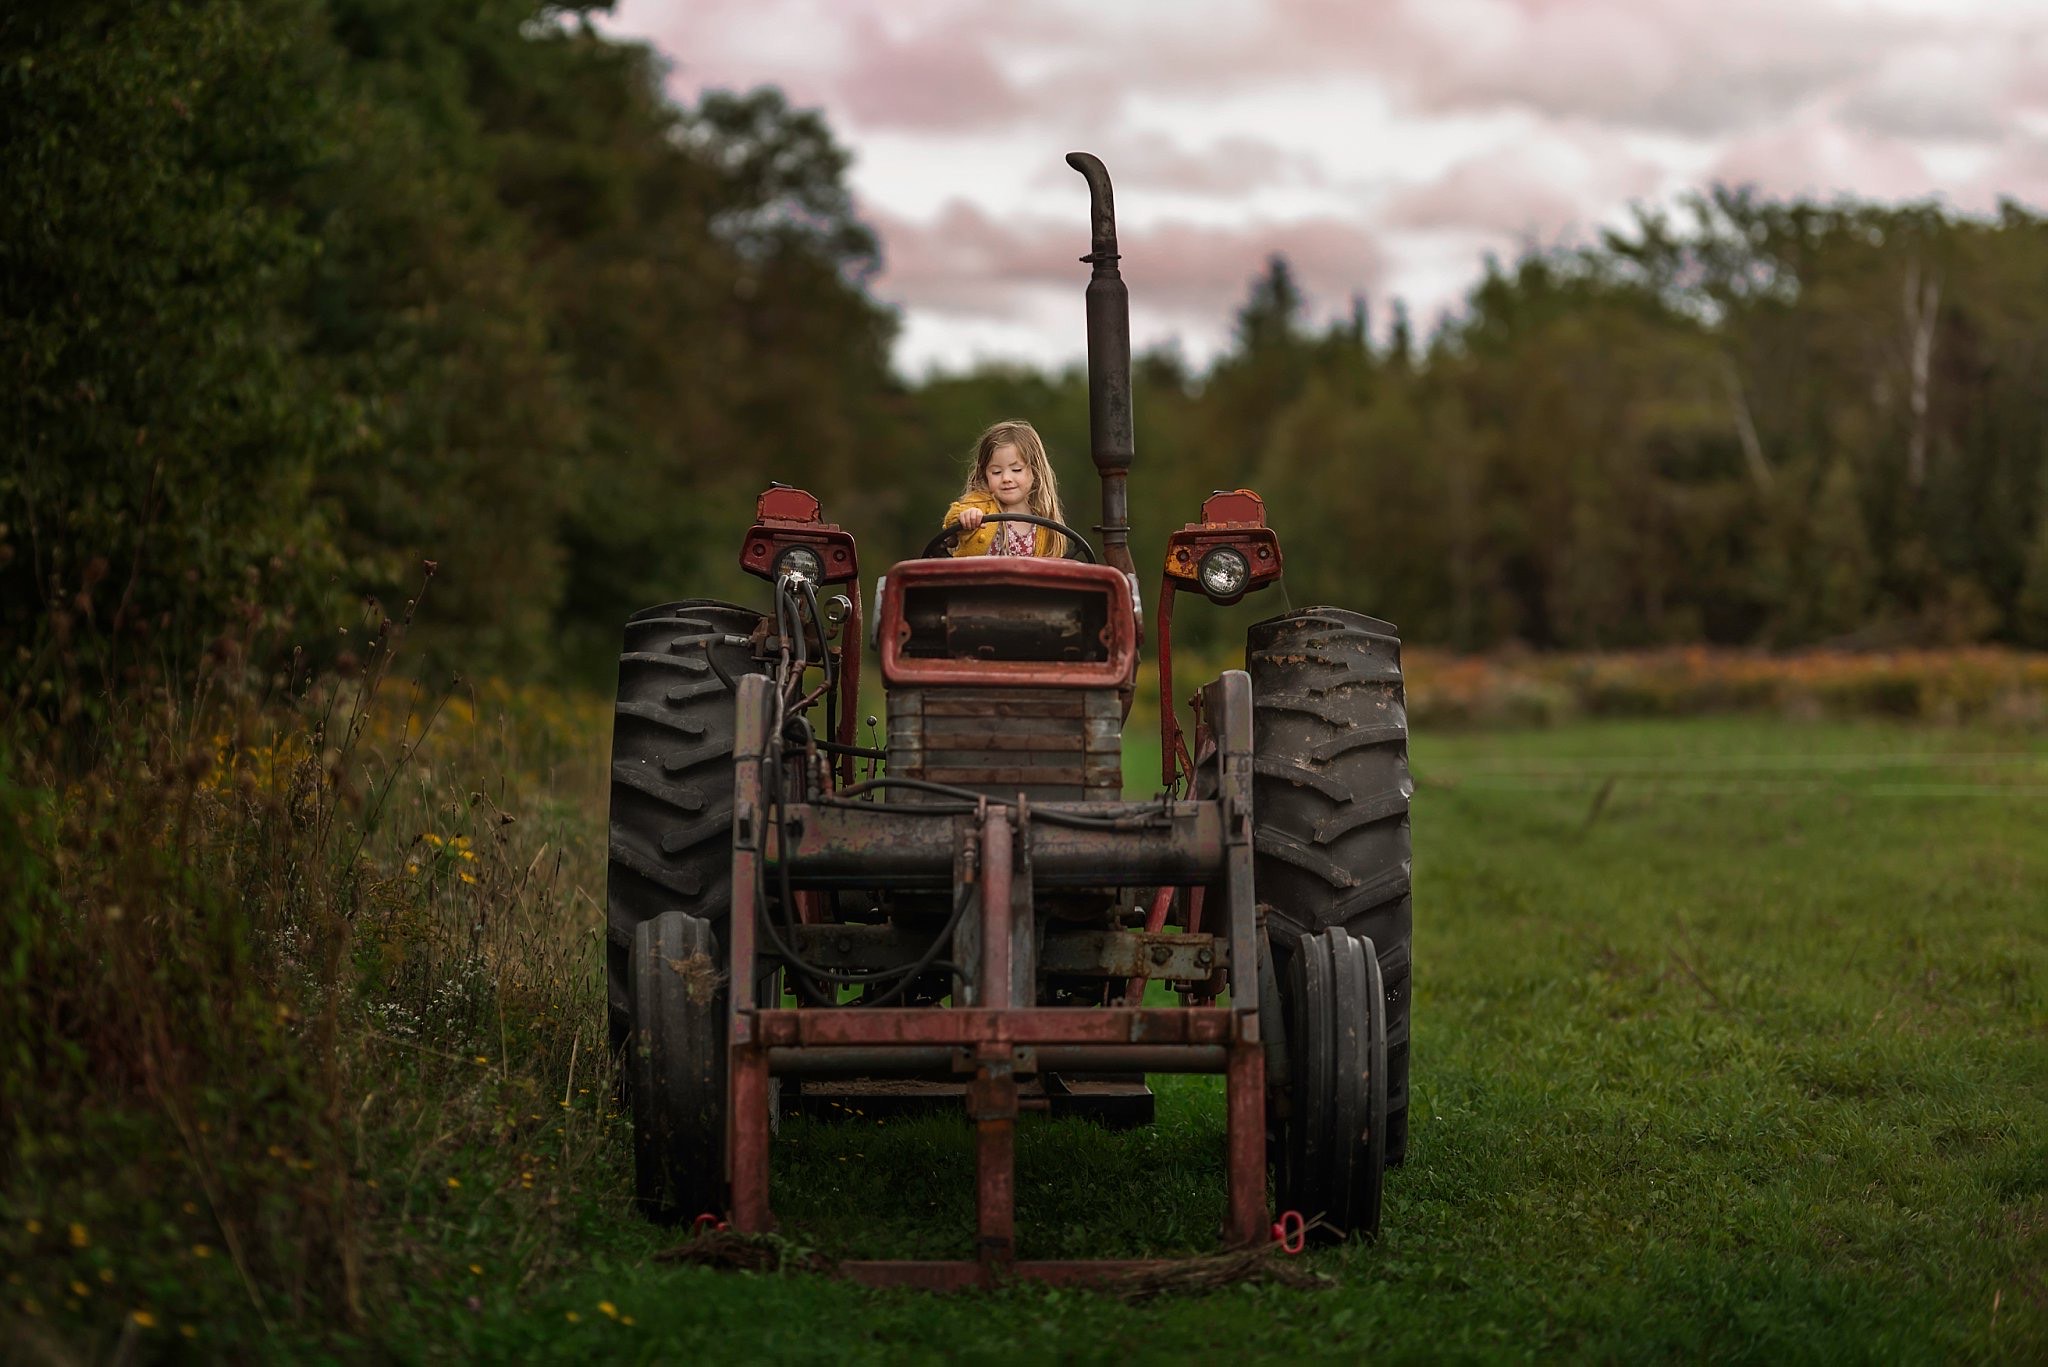 Creating a nostalgic childhood - girl on a tractor